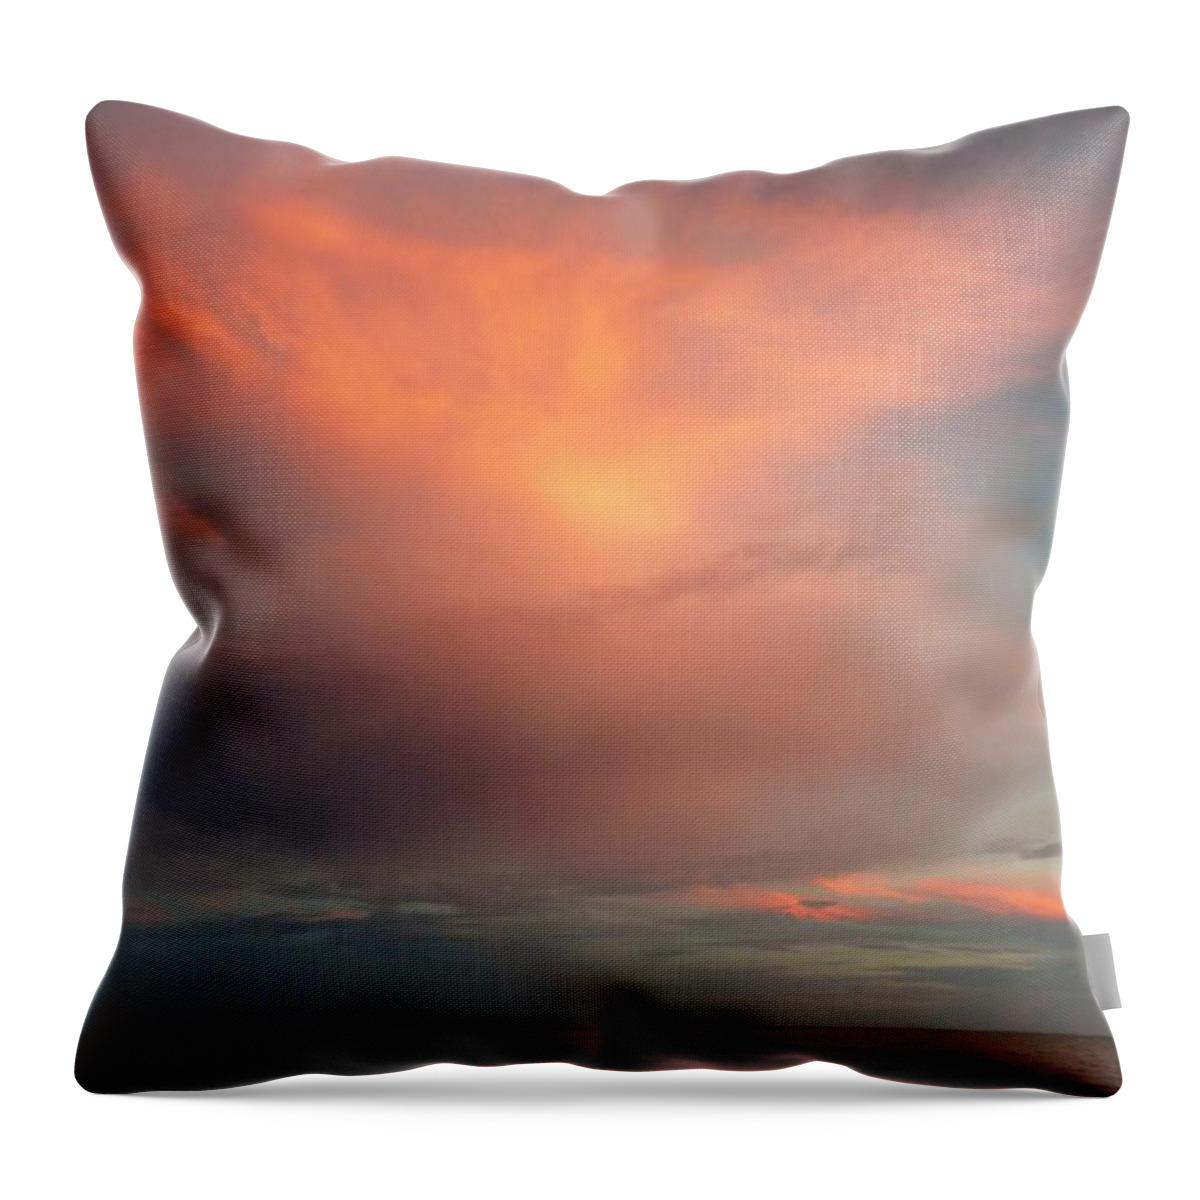 Sunset Throw Pillow featuring the photograph Sunset Moonrise by Melanie Moraga